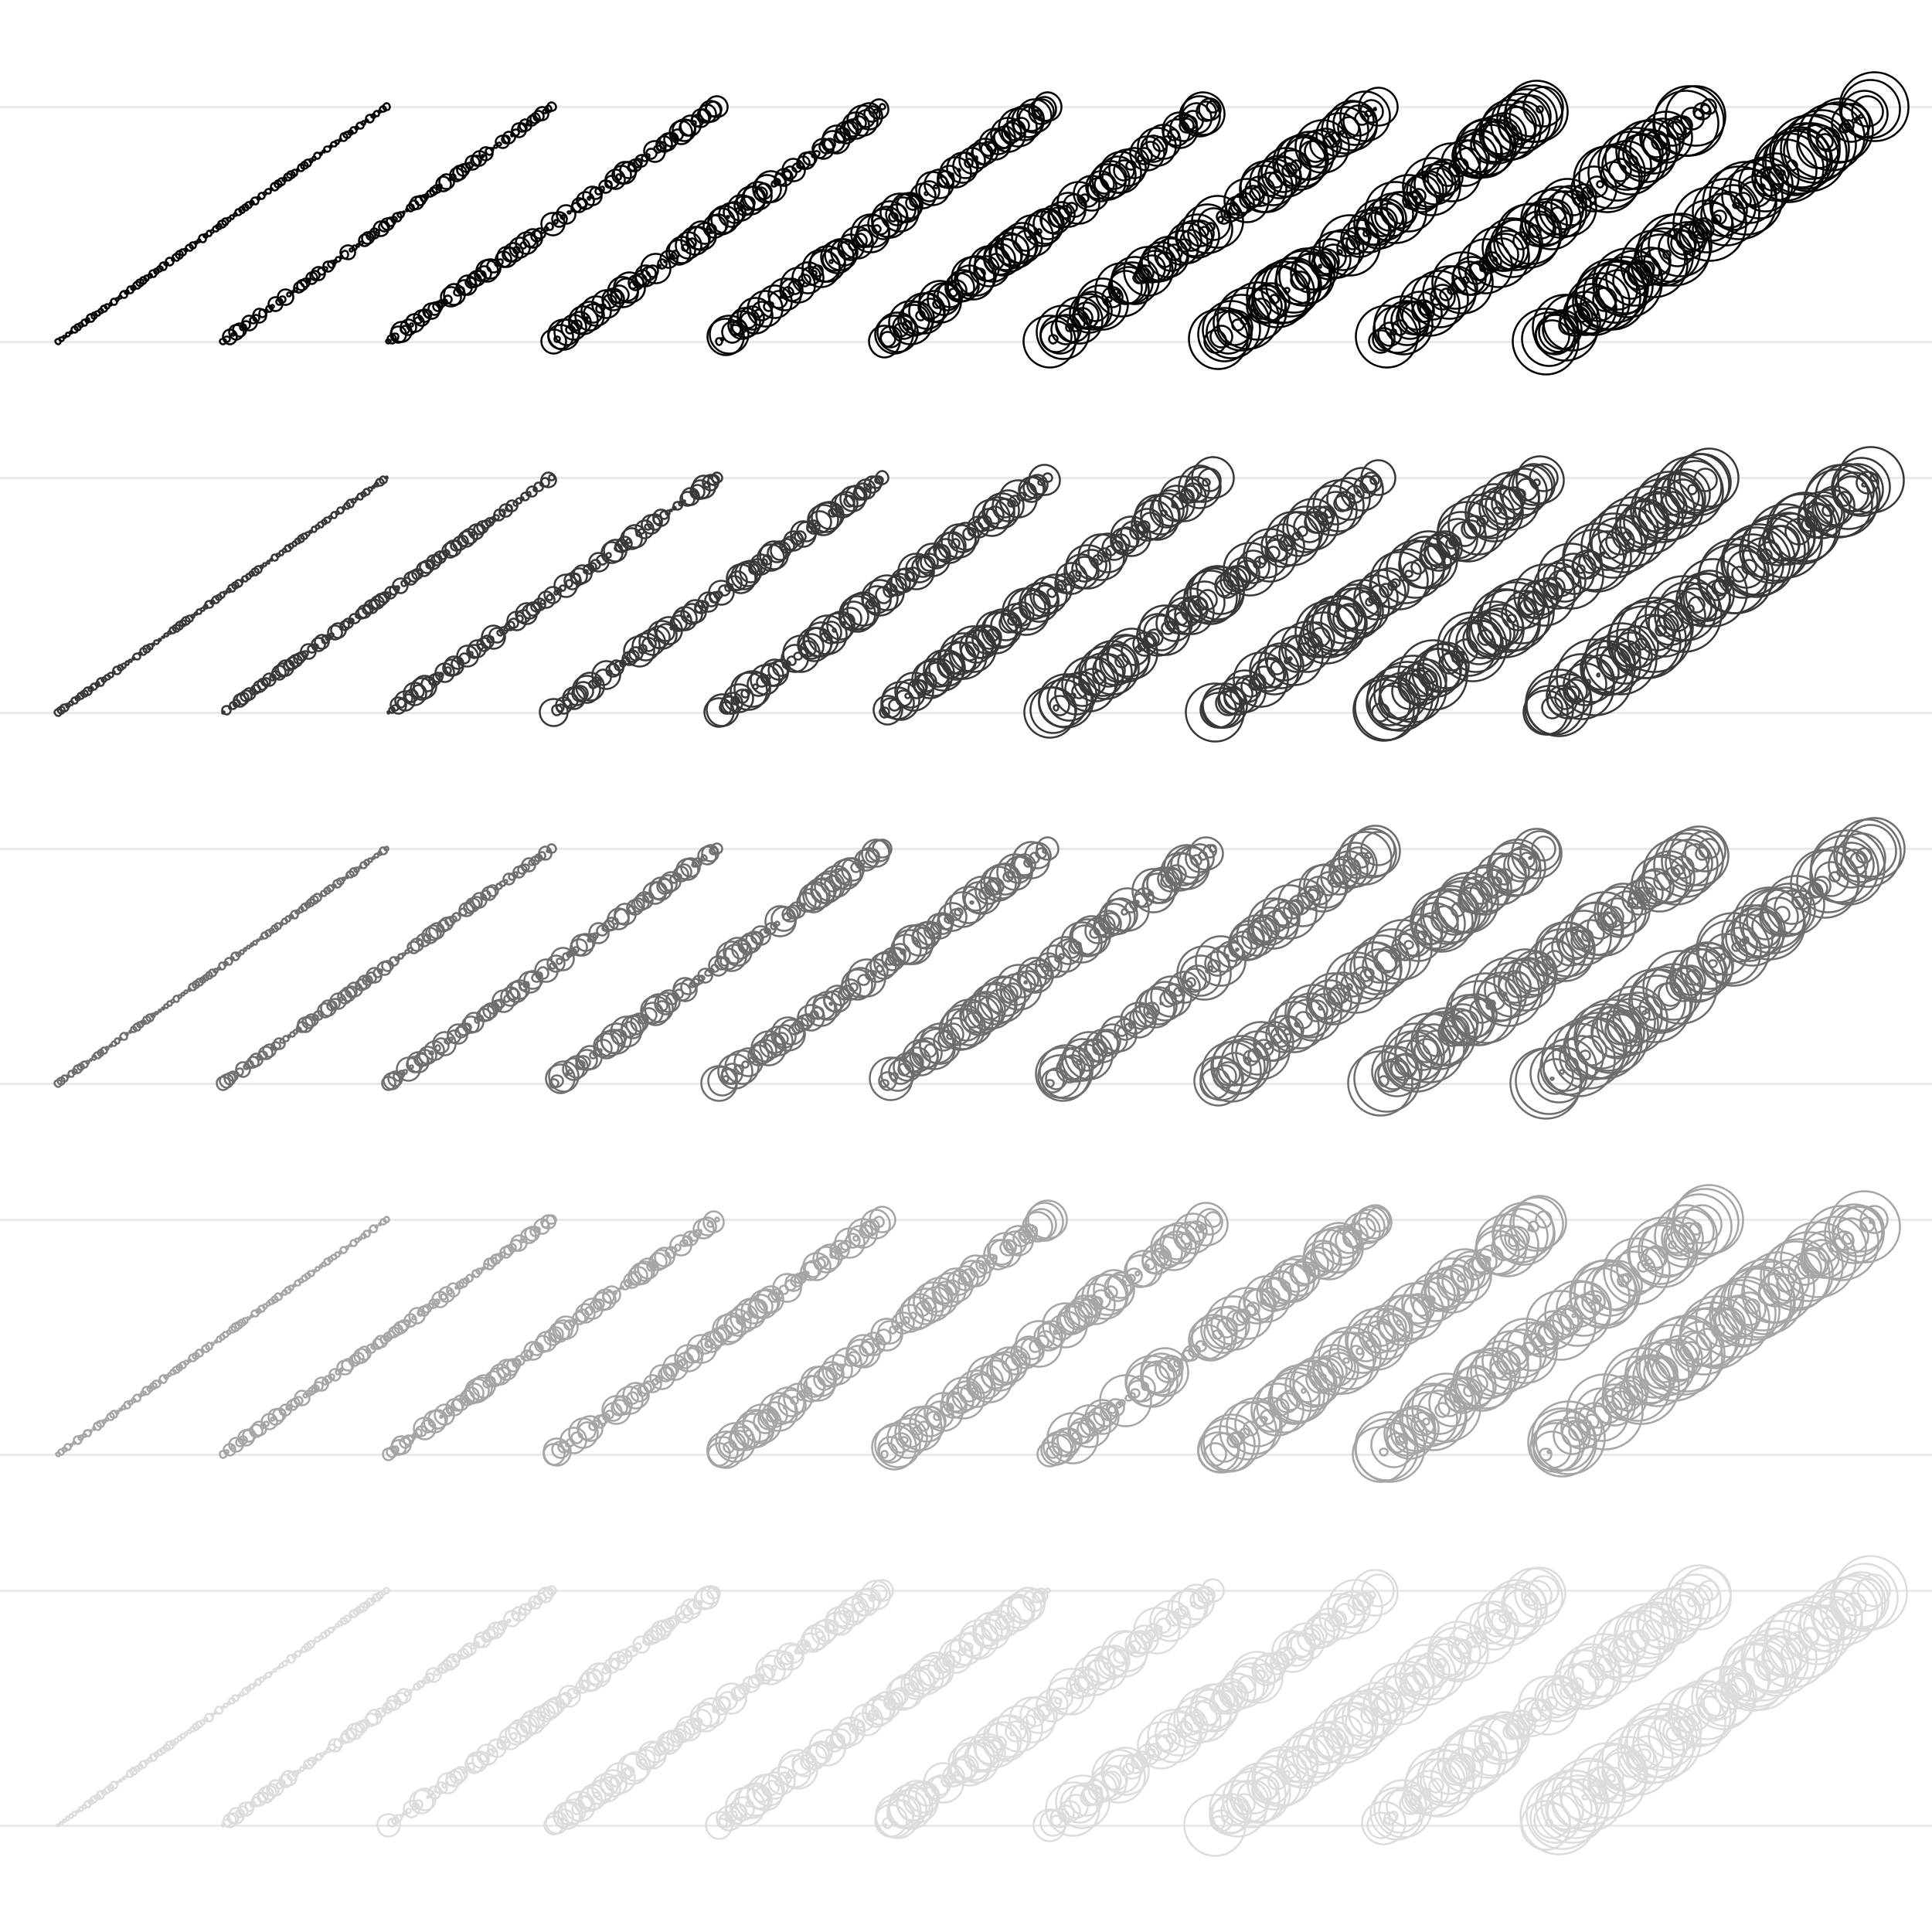 Variation of drawing line tension with time for (a) different feed